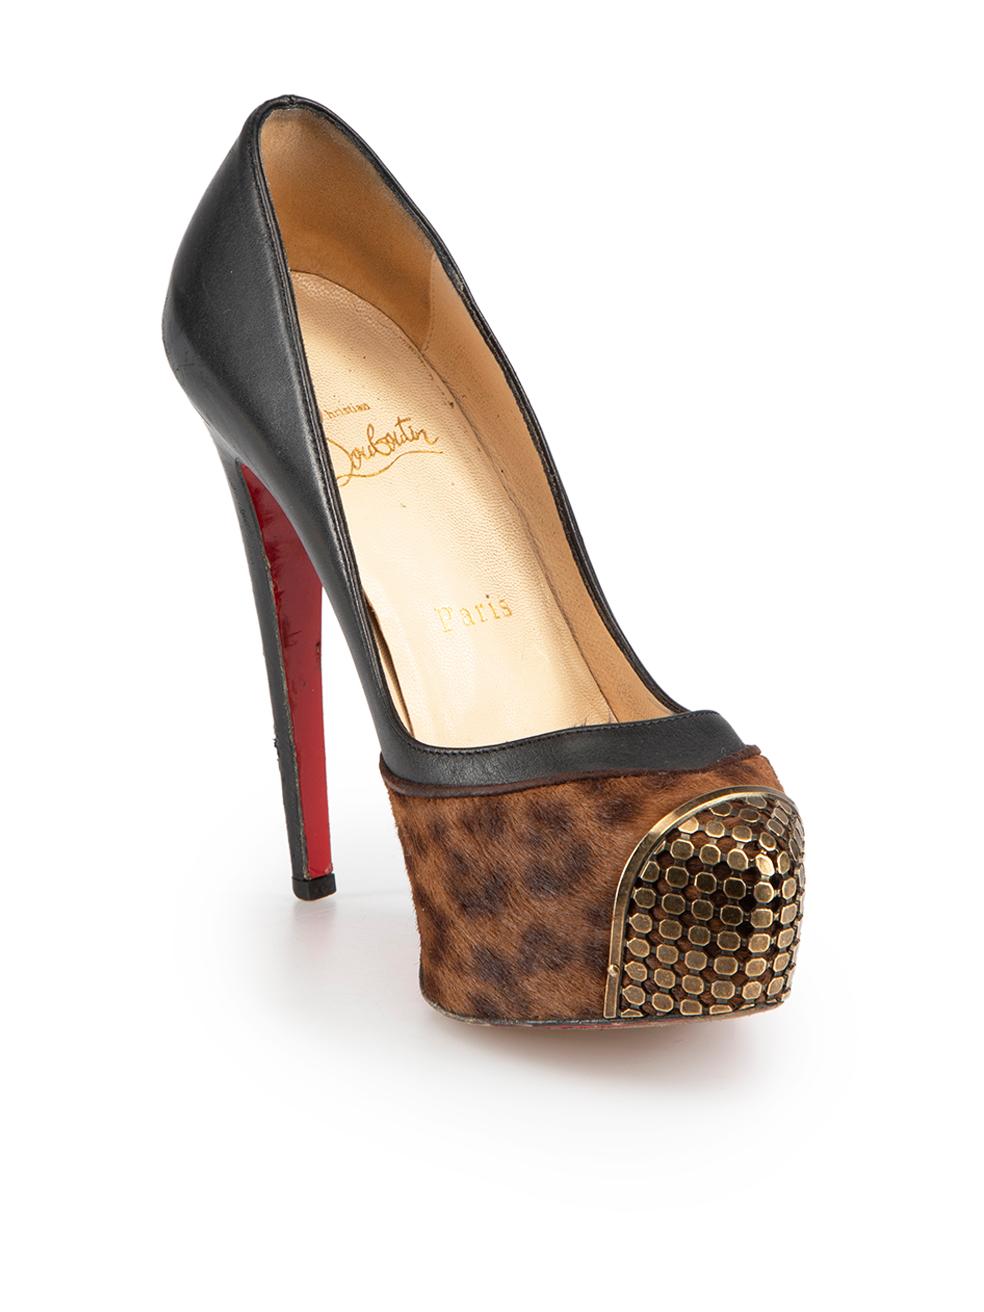 CONDITION is Good. Minor wear to shoes is evident. Light wear to both shoe heels and leather panels with abrasions to the leather. There are also marks and scratches to the footbeds and heels on this used Christian Louboutin designer resale item.
 
